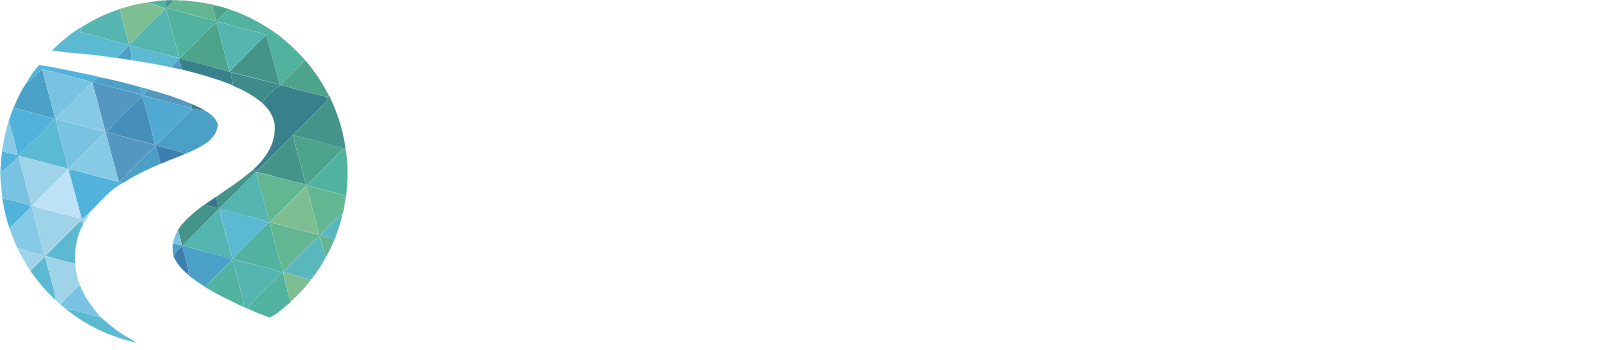 Travere Therapeutics logo large for dark backgrounds (transparent PNG)